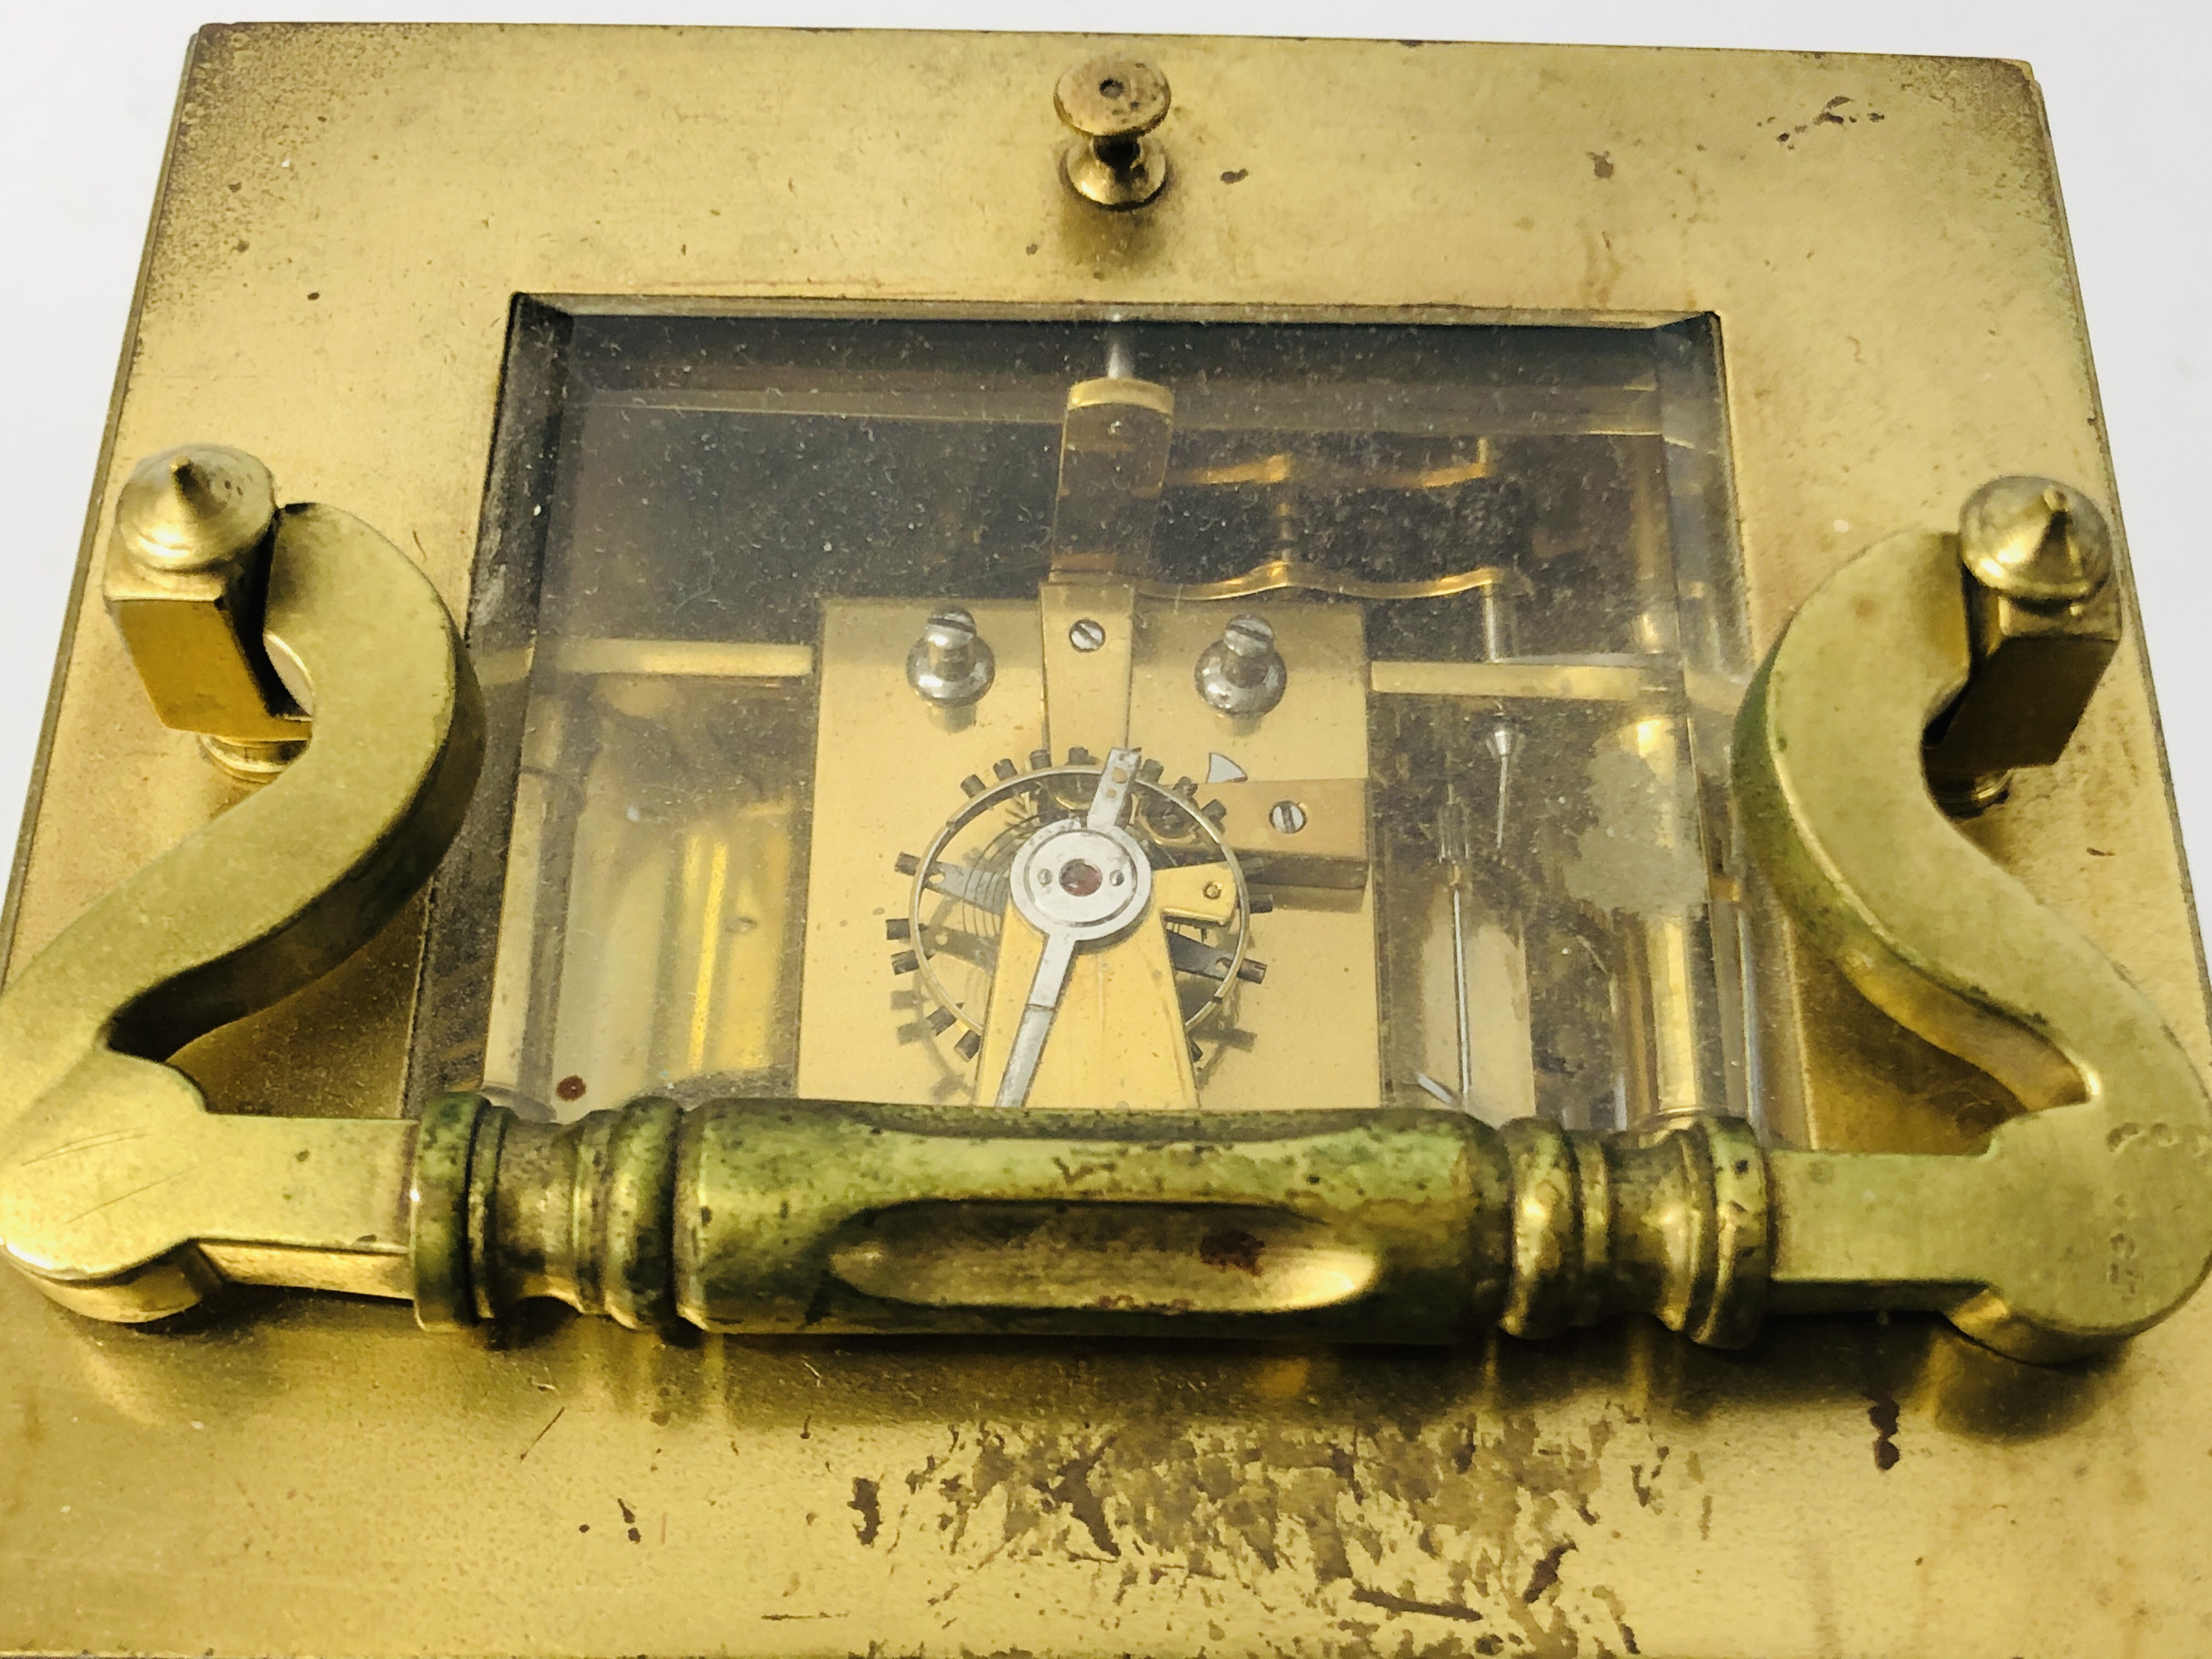 ANTIQUE BRASS CARRIDGE CLOCK WITH ENAMELLED FACE (REQUIRES ATTENTION TO THE REAR GLASS) H 14CM. - Image 8 of 9